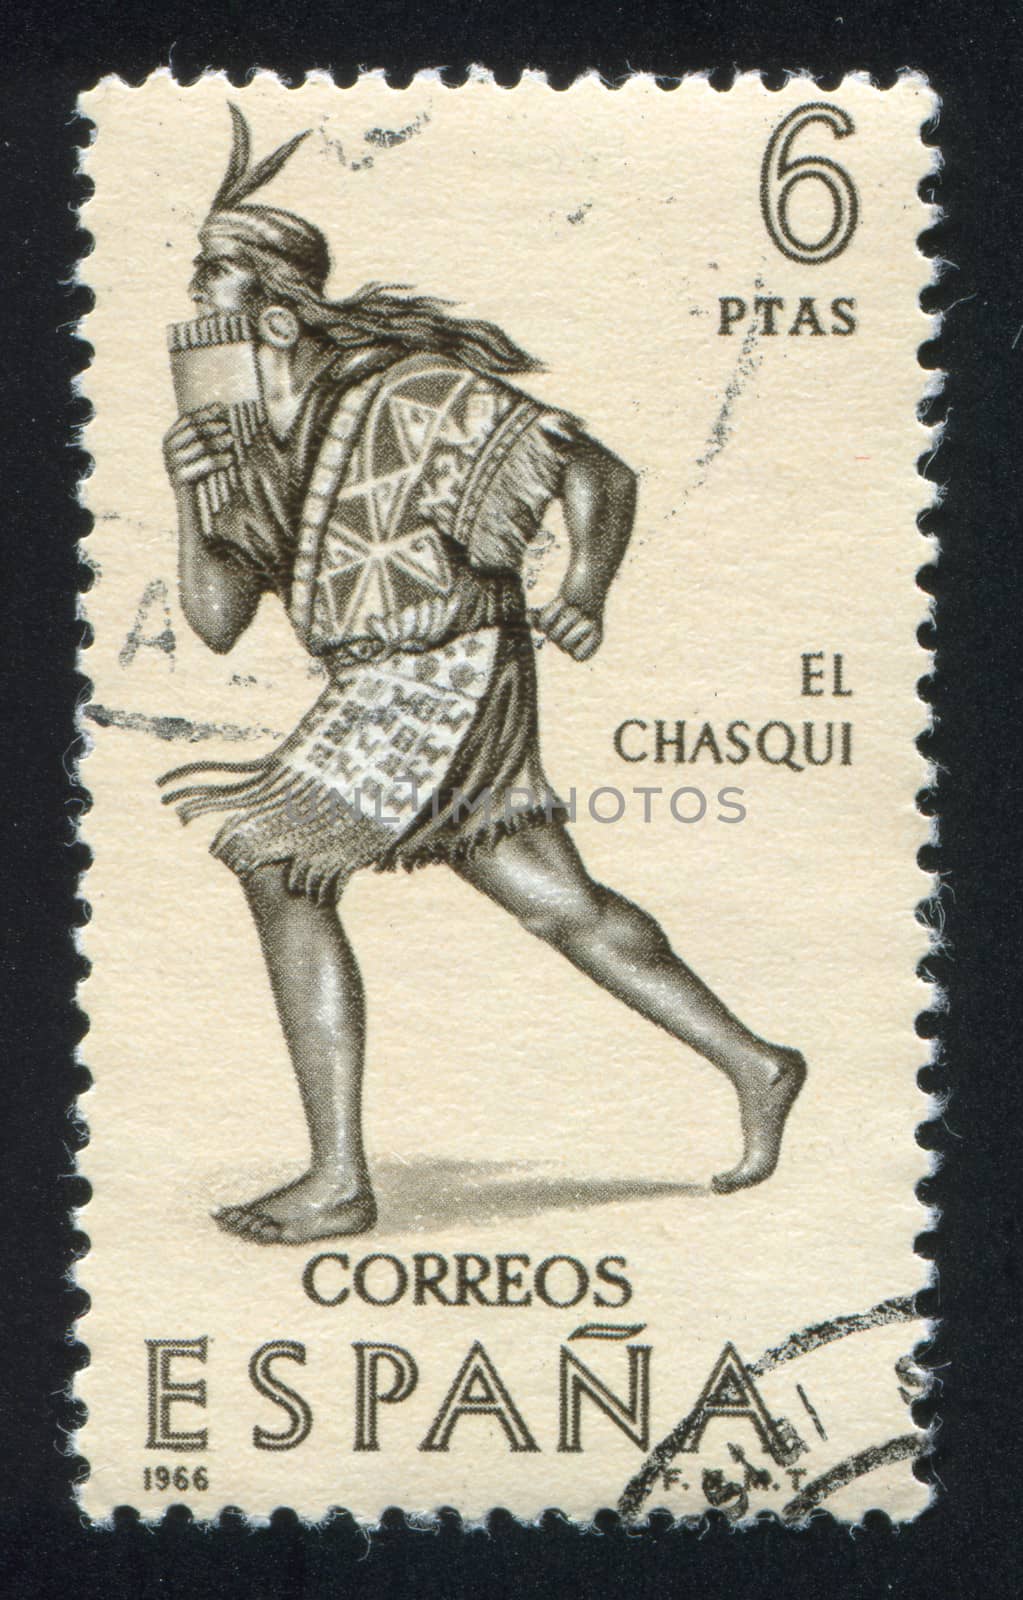 SPAIN - CIRCA 1966: stamp printed by Spain, shows Indian, Courier, circa 1966